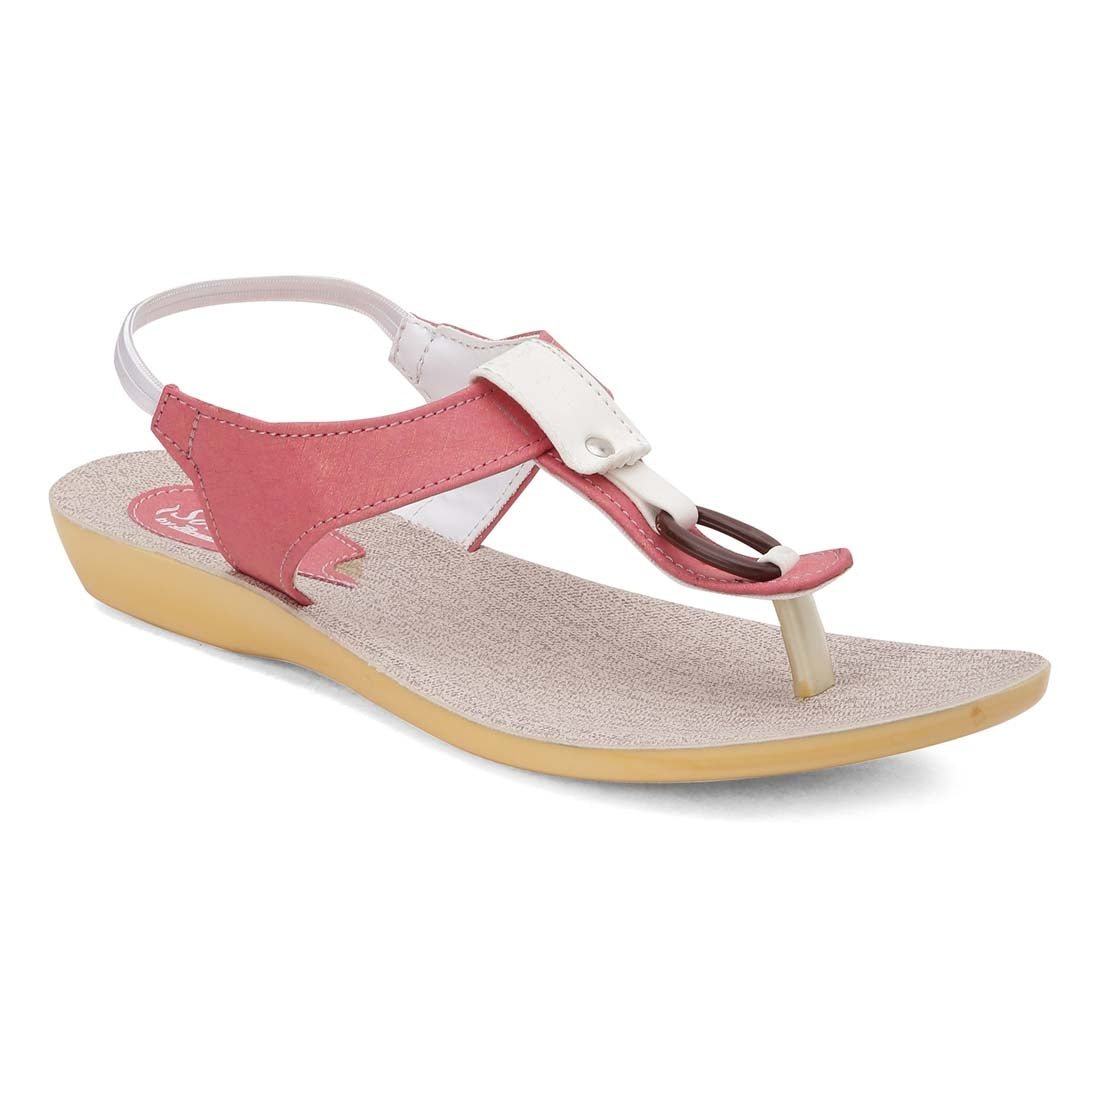 Paragon PU7083L Women Sandals | Casual &amp; Formal Sandals | Stylish, Comfortable &amp; Durable | For Daily &amp; Occasion Wear